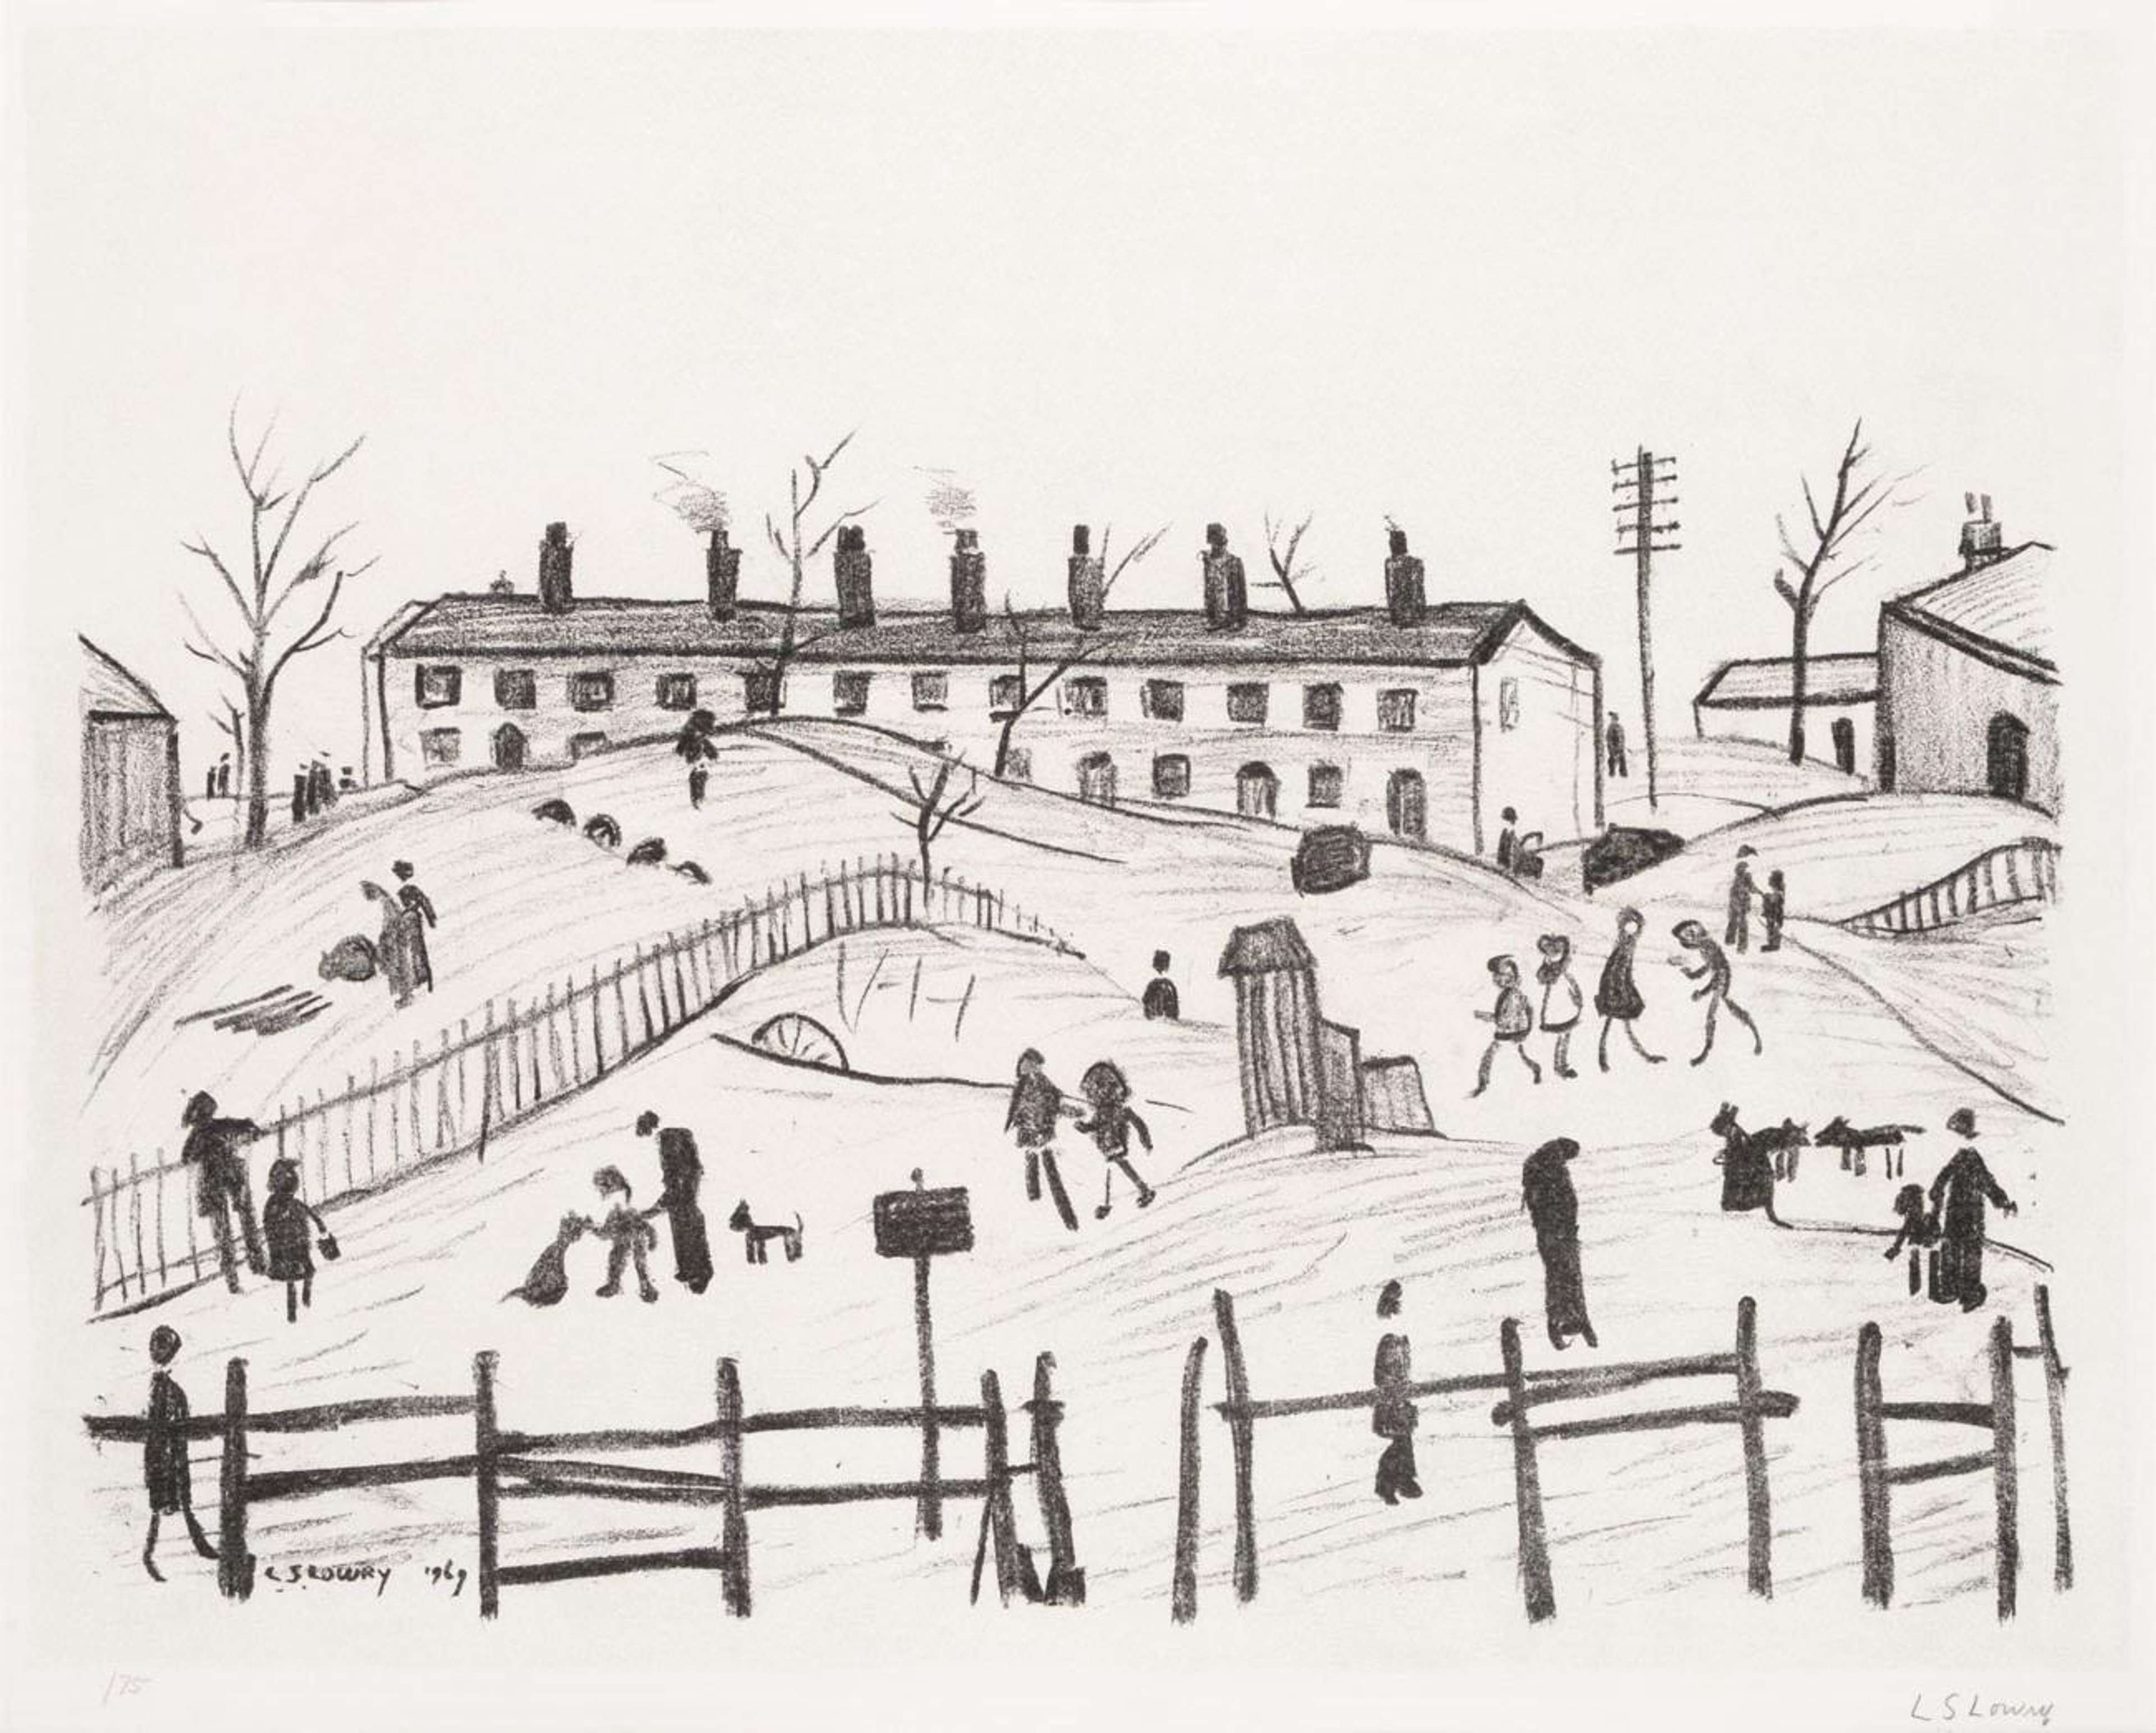 Winter In Broughton - Signed Print by L S Lowry 1969 - MyArtBroker